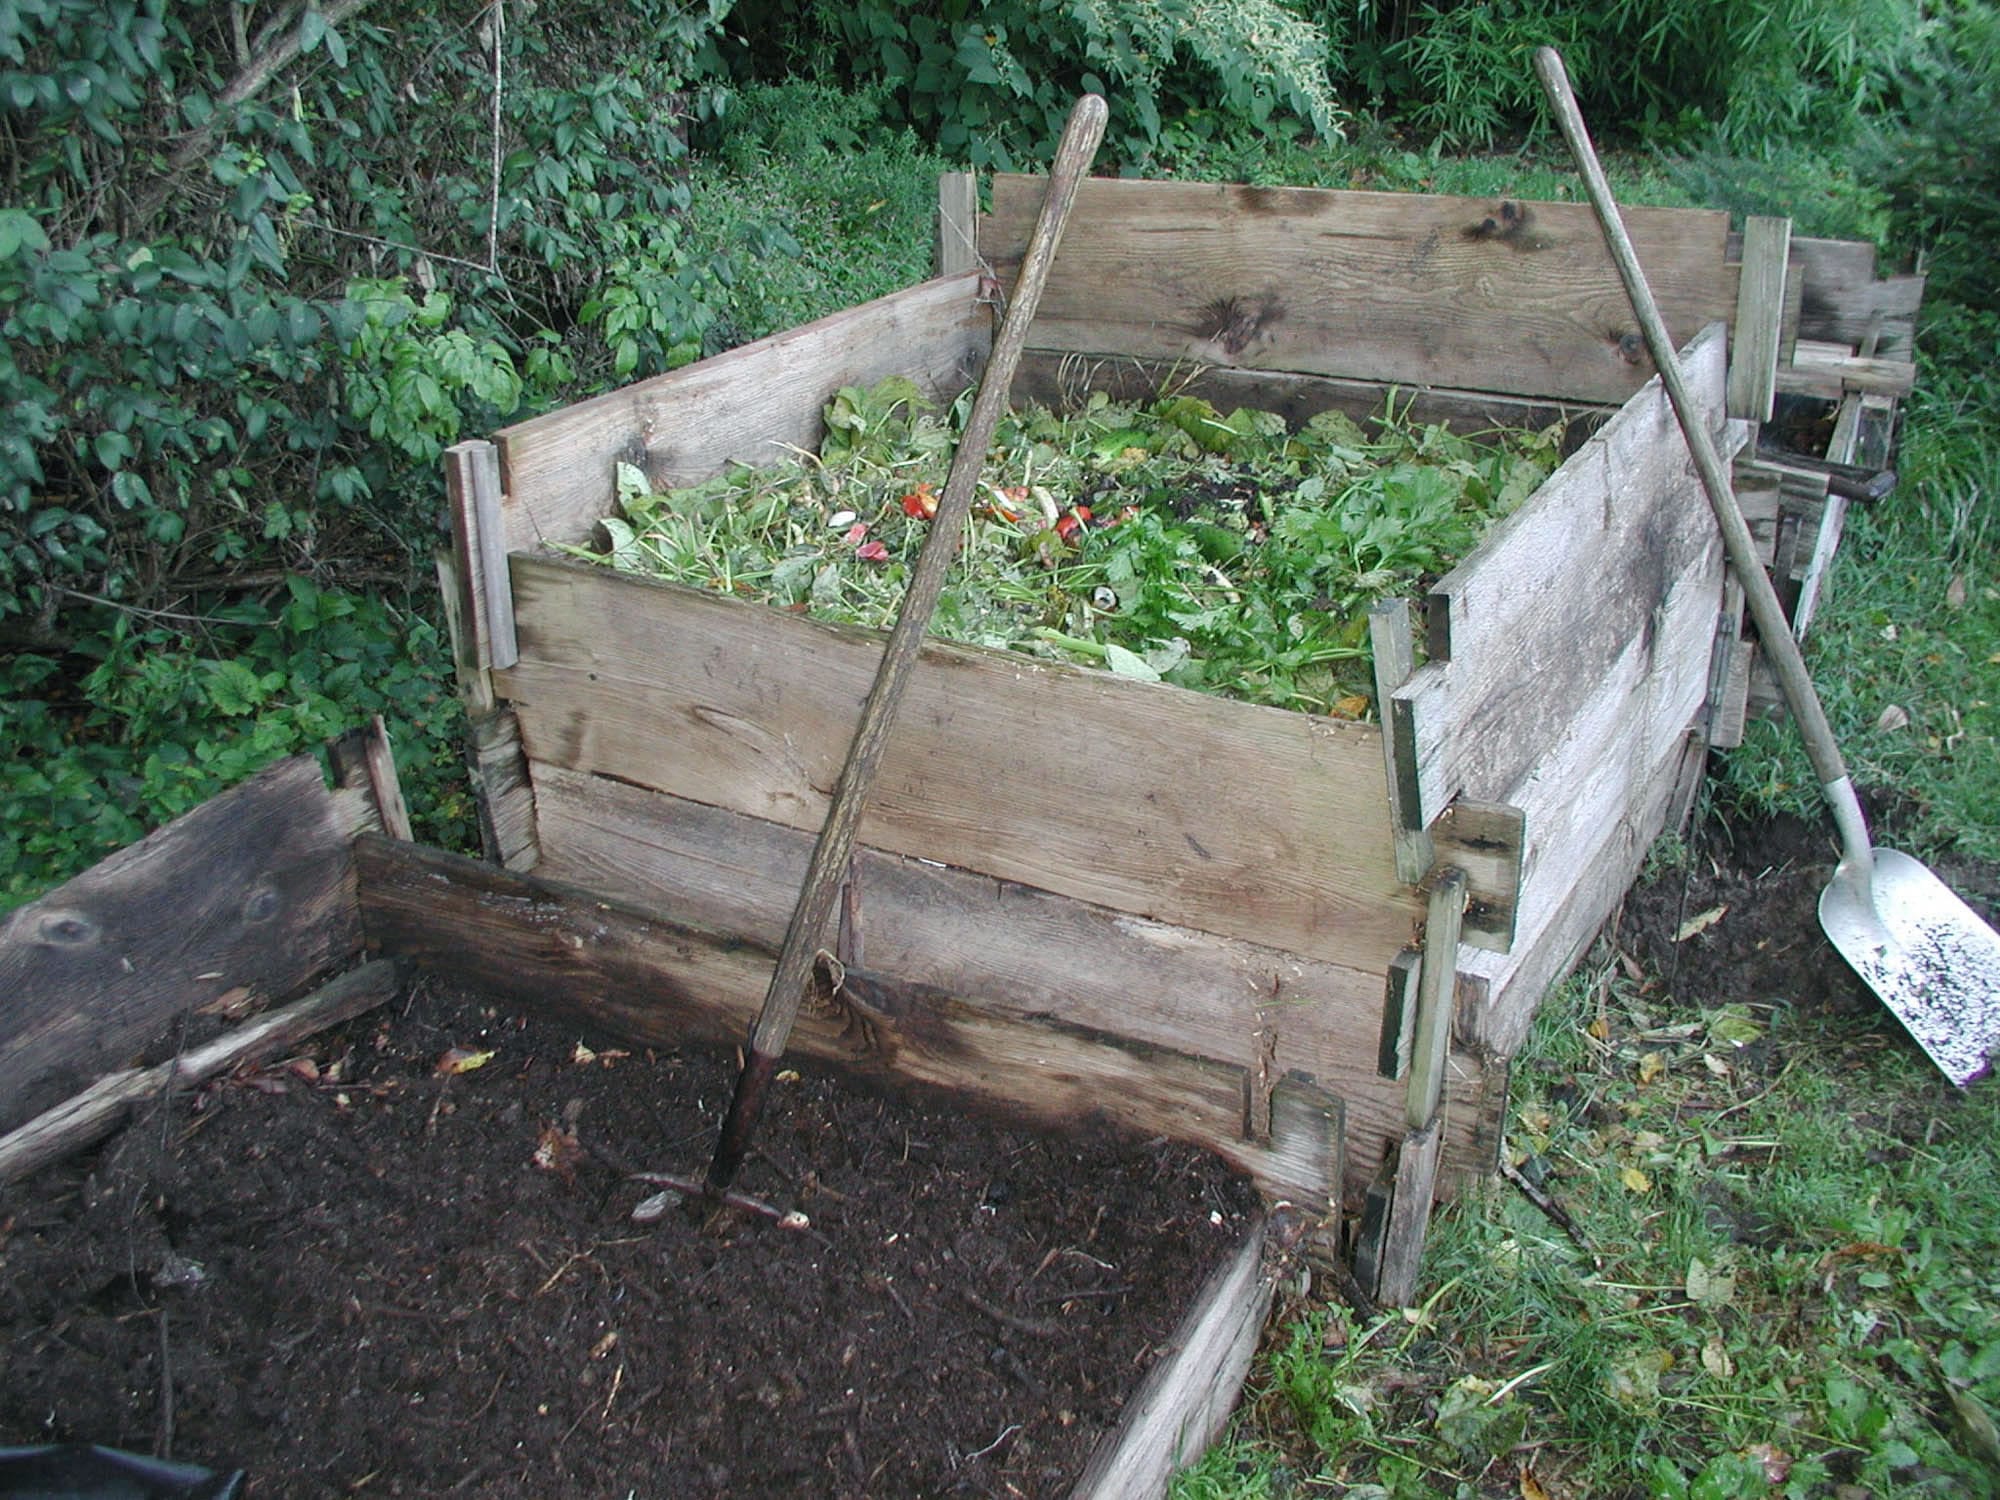 Different methods of composting will be taught in an upcoming class.